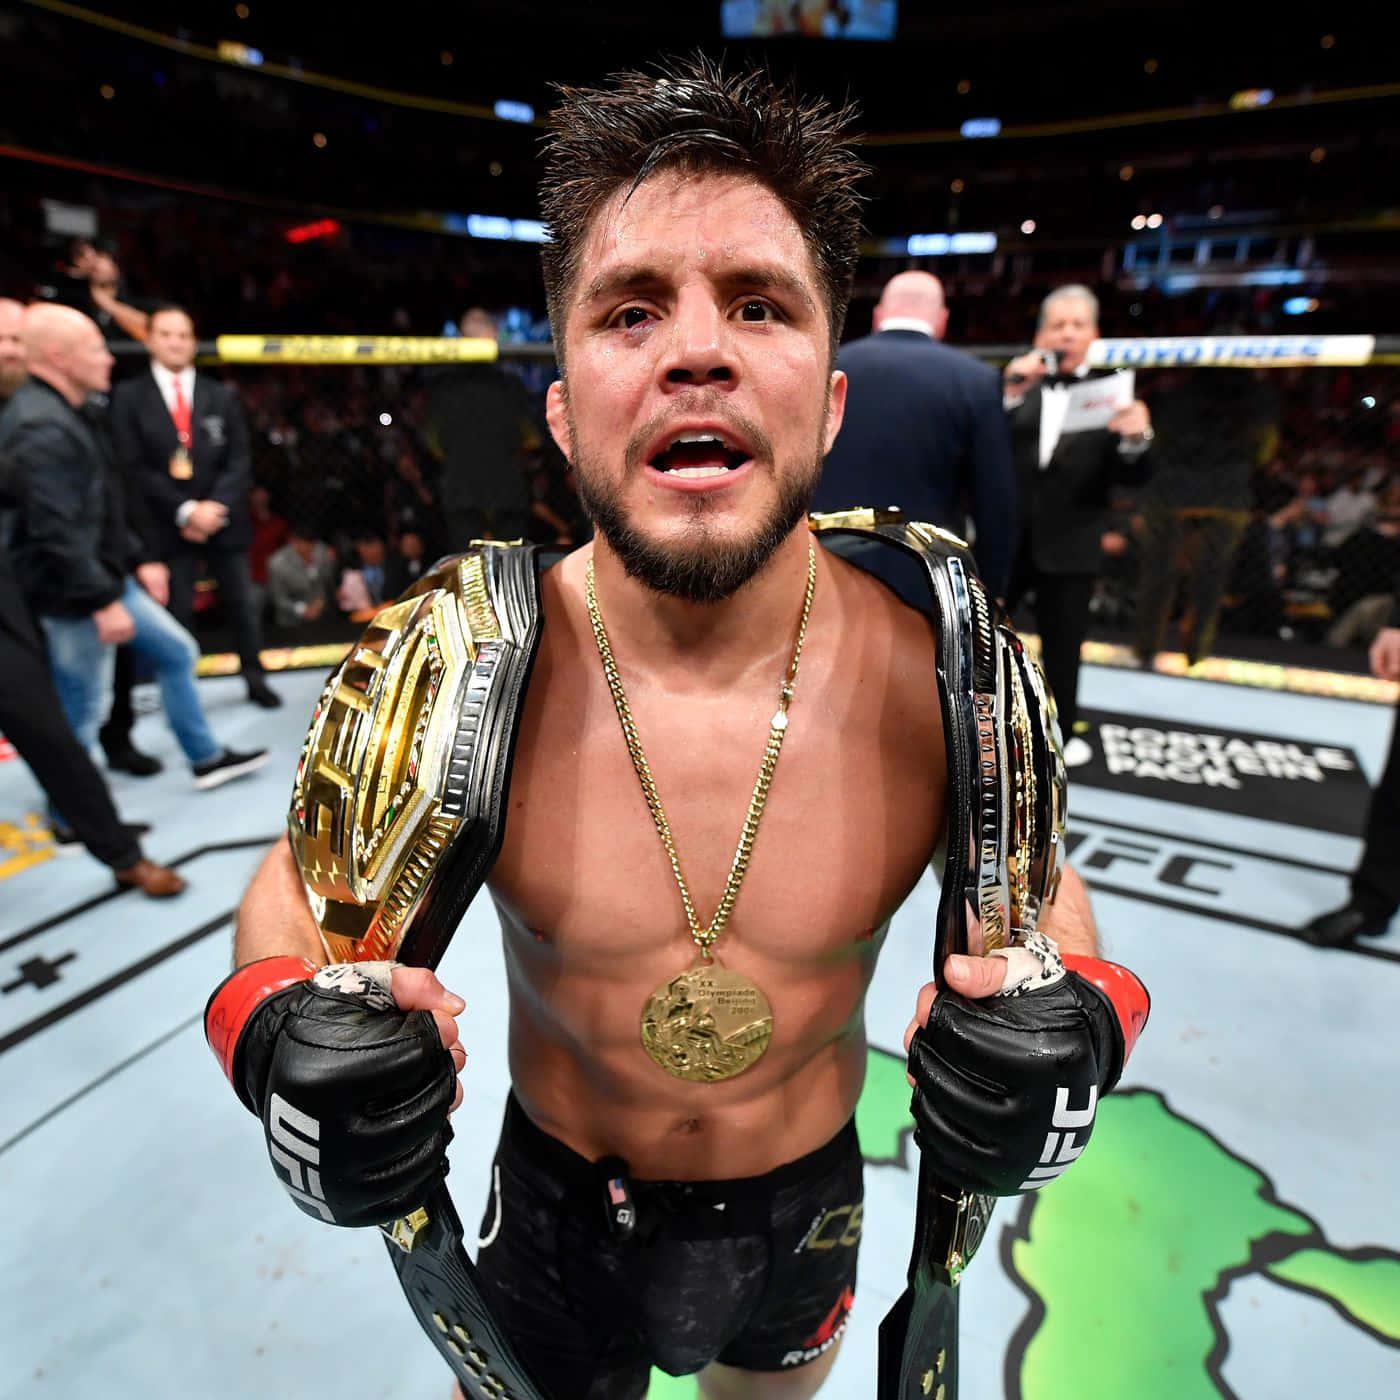 Henry Cejudo's career is on the line